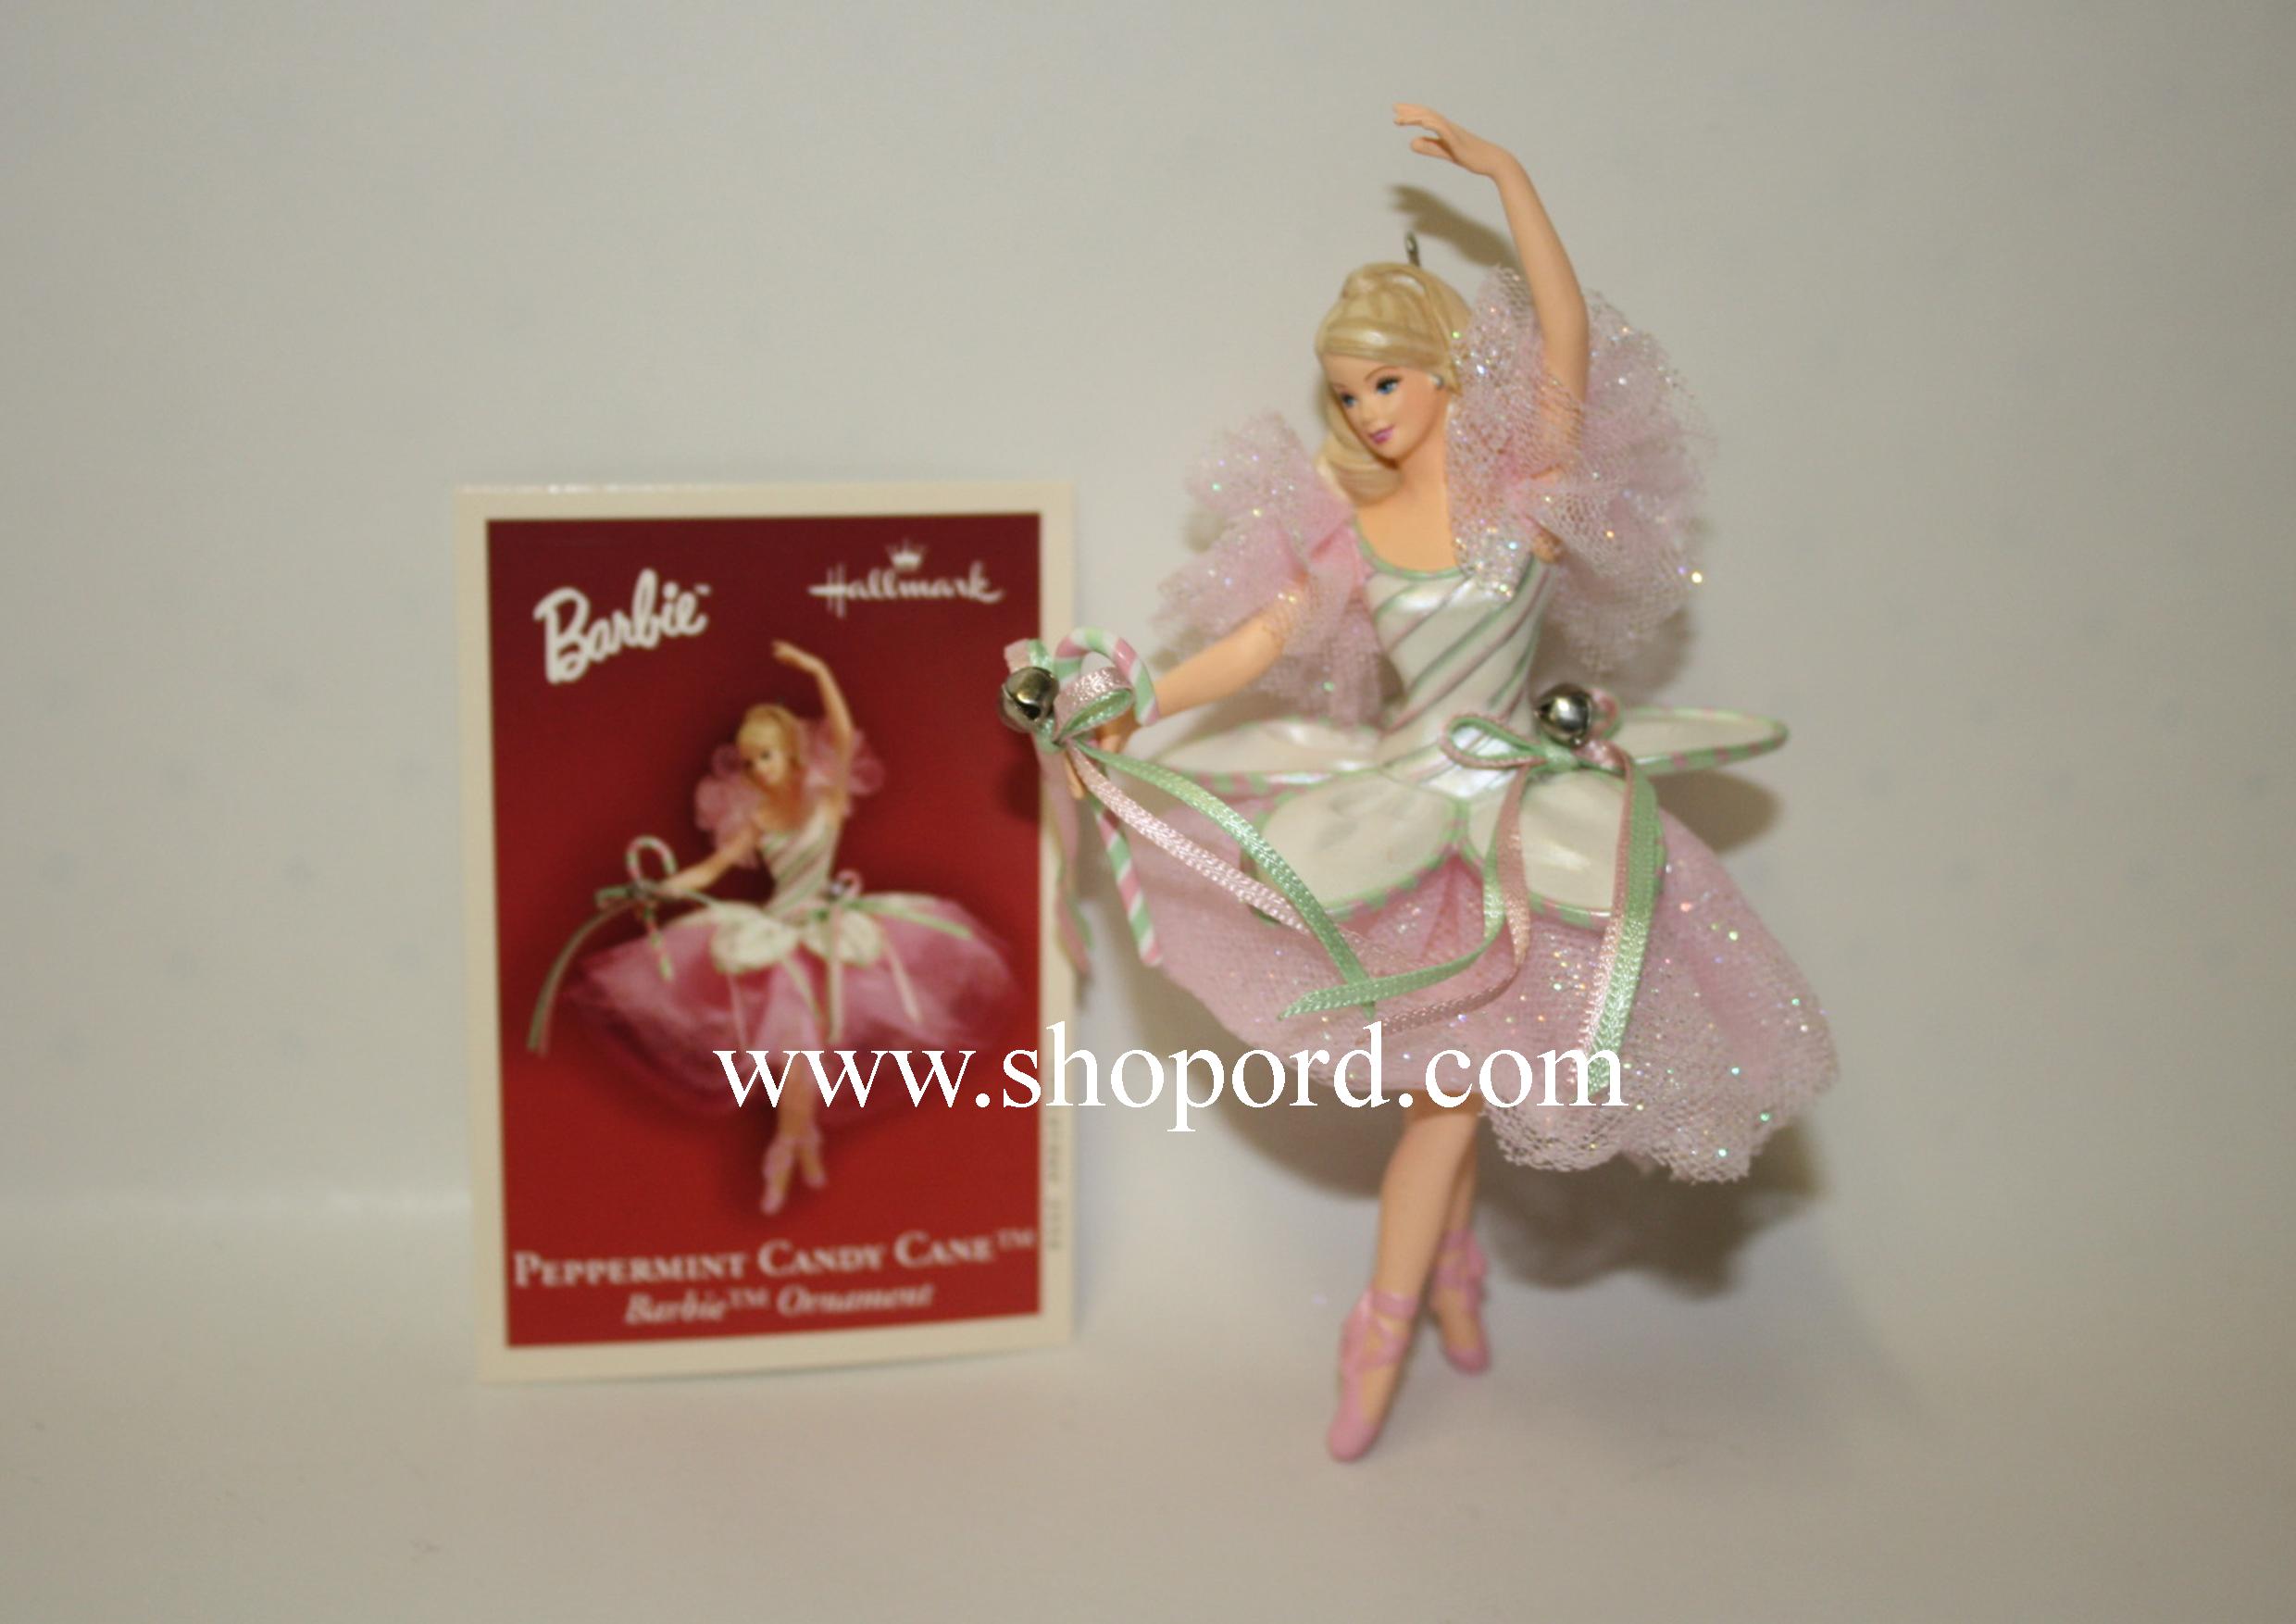 Peppermint Candy Cane Barbie